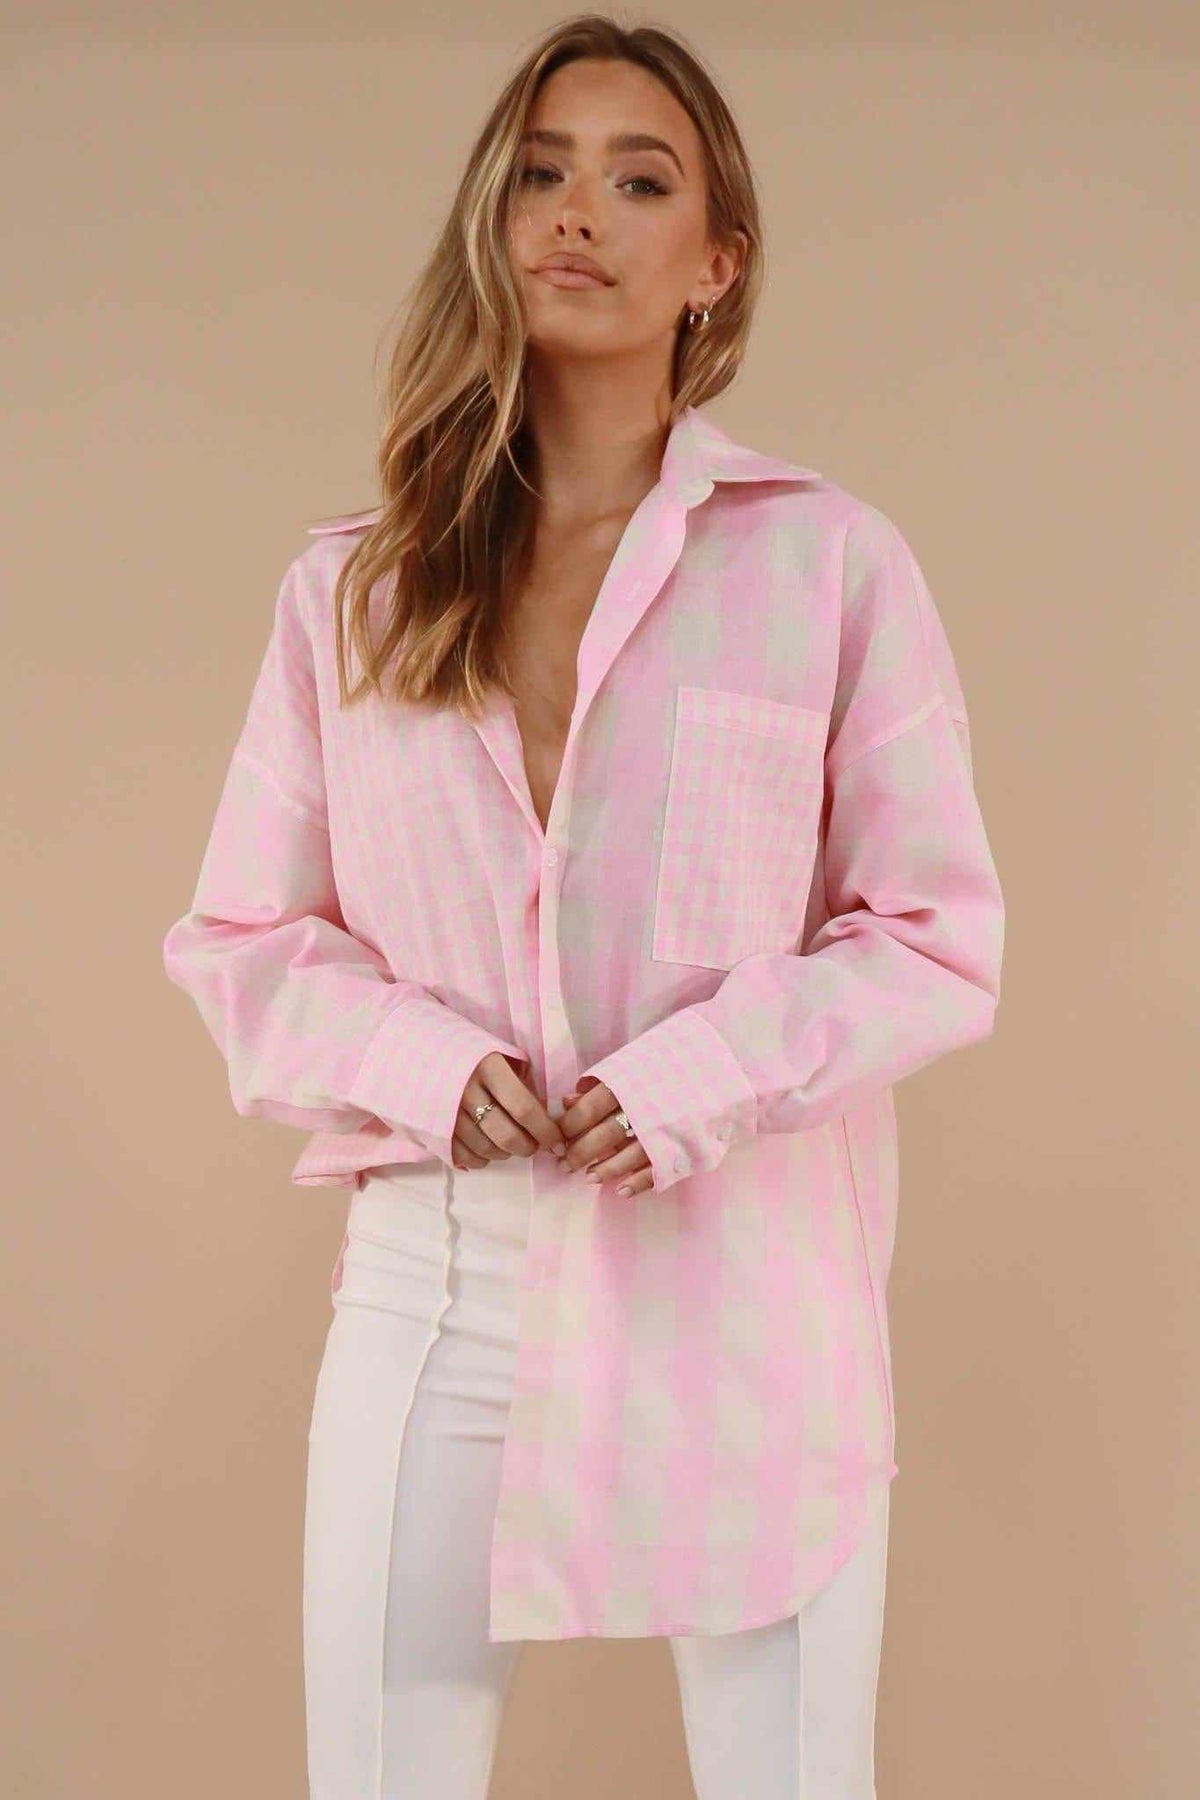 Devany Top, COTTON &amp; LINEN, COTTON AND LINEN, LINEN &amp; COTTON, LINEN AND COTTON, LONG SLEEVE, PINK, Sale, TOP, TOPS, Our New Devany Top Is Now Only $66.00 Exclusive At Mishkah, Our New Devany Top is now only $66.00-We Have The Latest Women&#39;s Tops @ Mishkah Online Fashion Boutique-MISHKAH